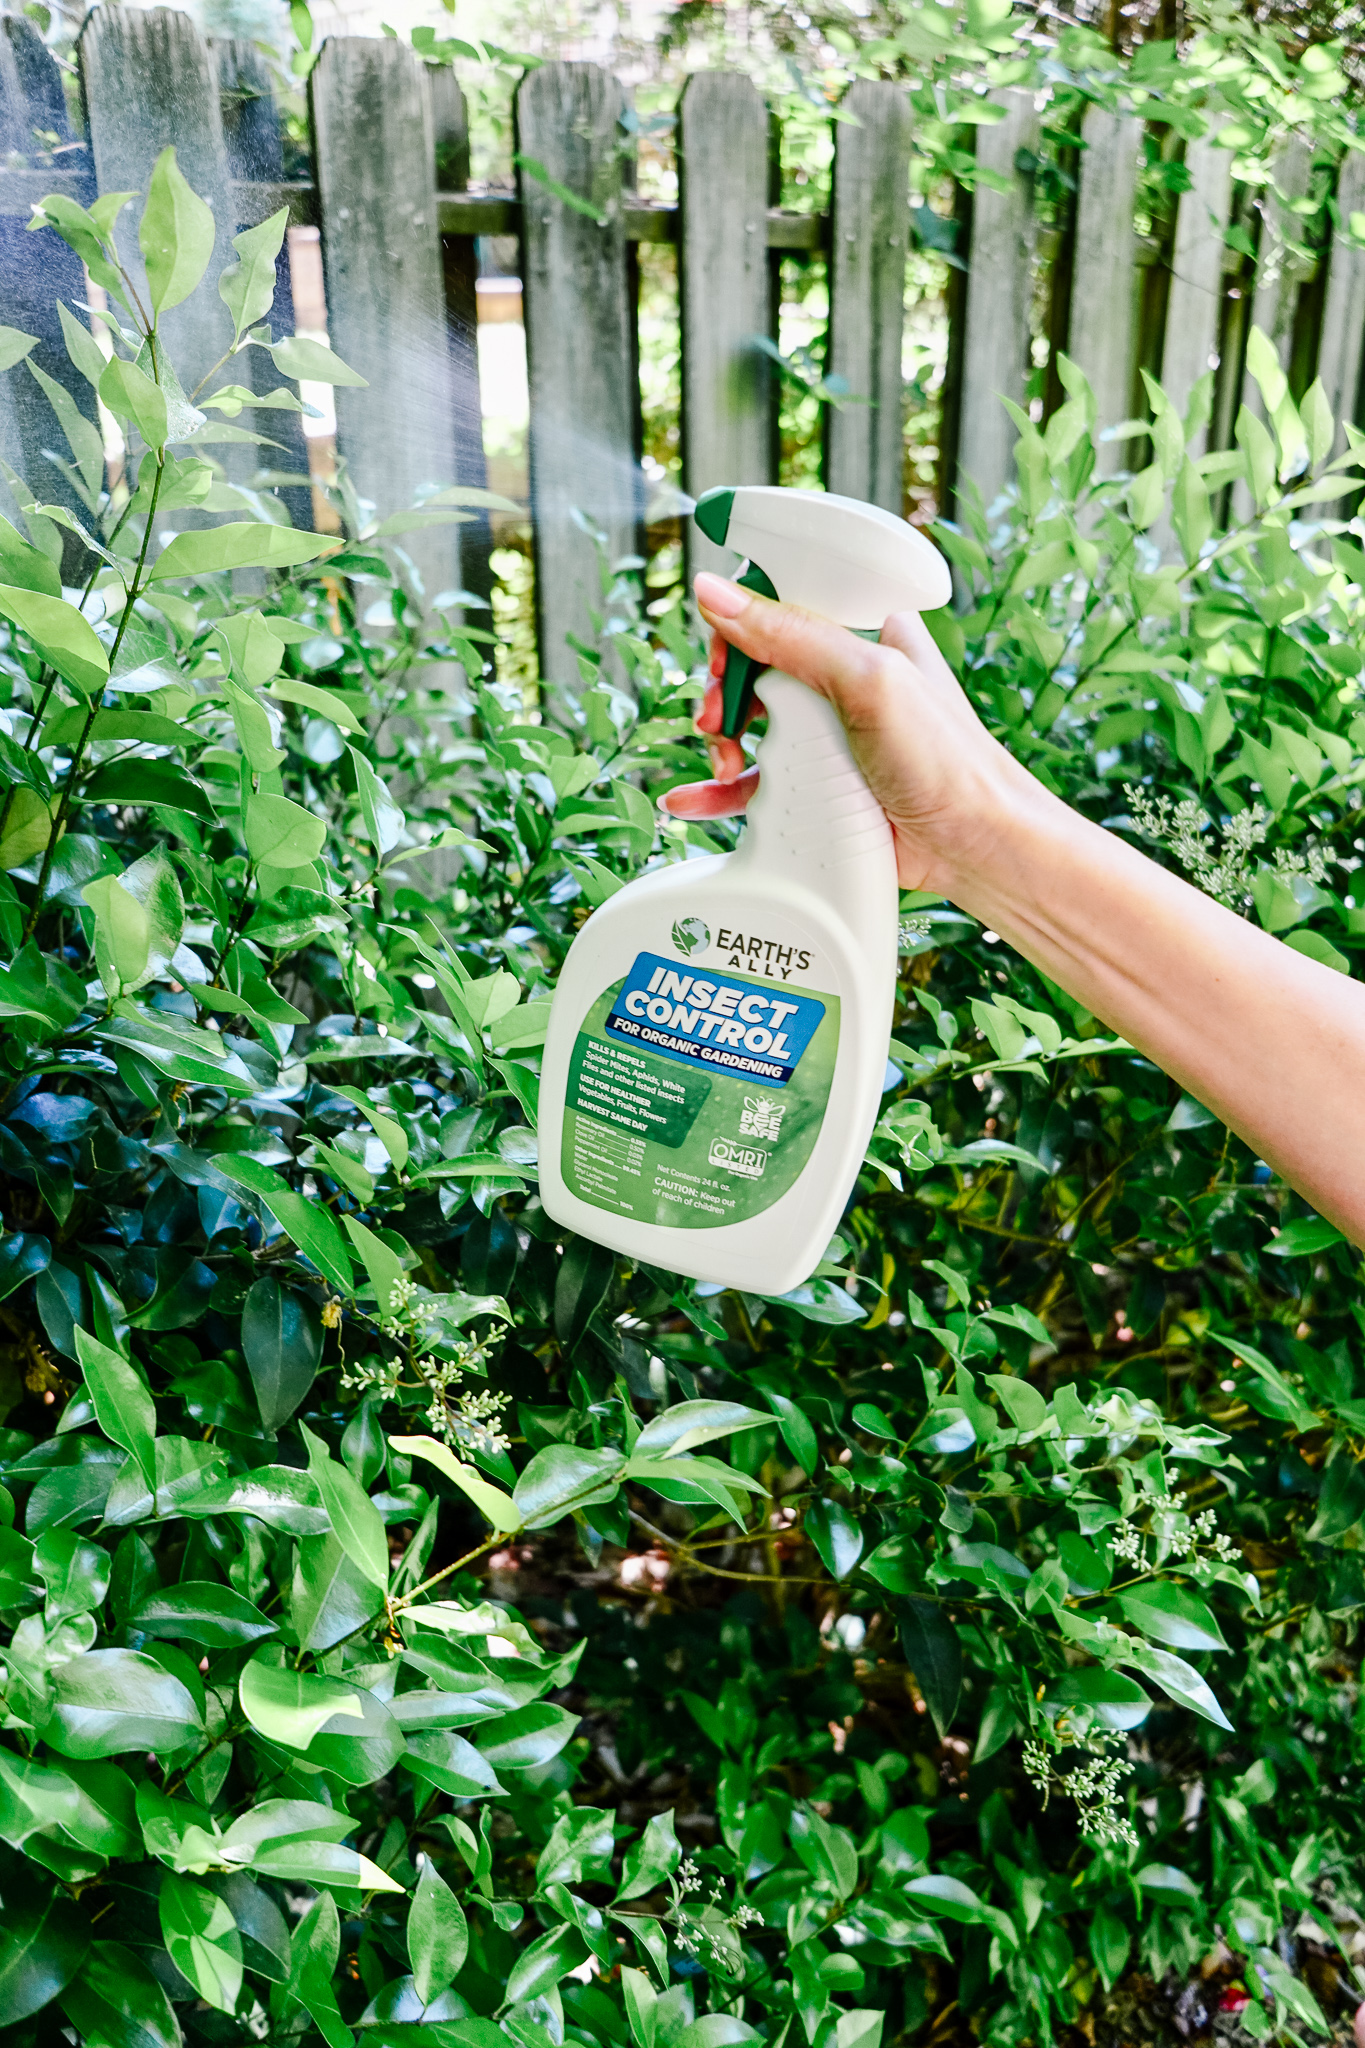 Earth's Ally Insect Control: A non-toxic lawn and garden product to control insects